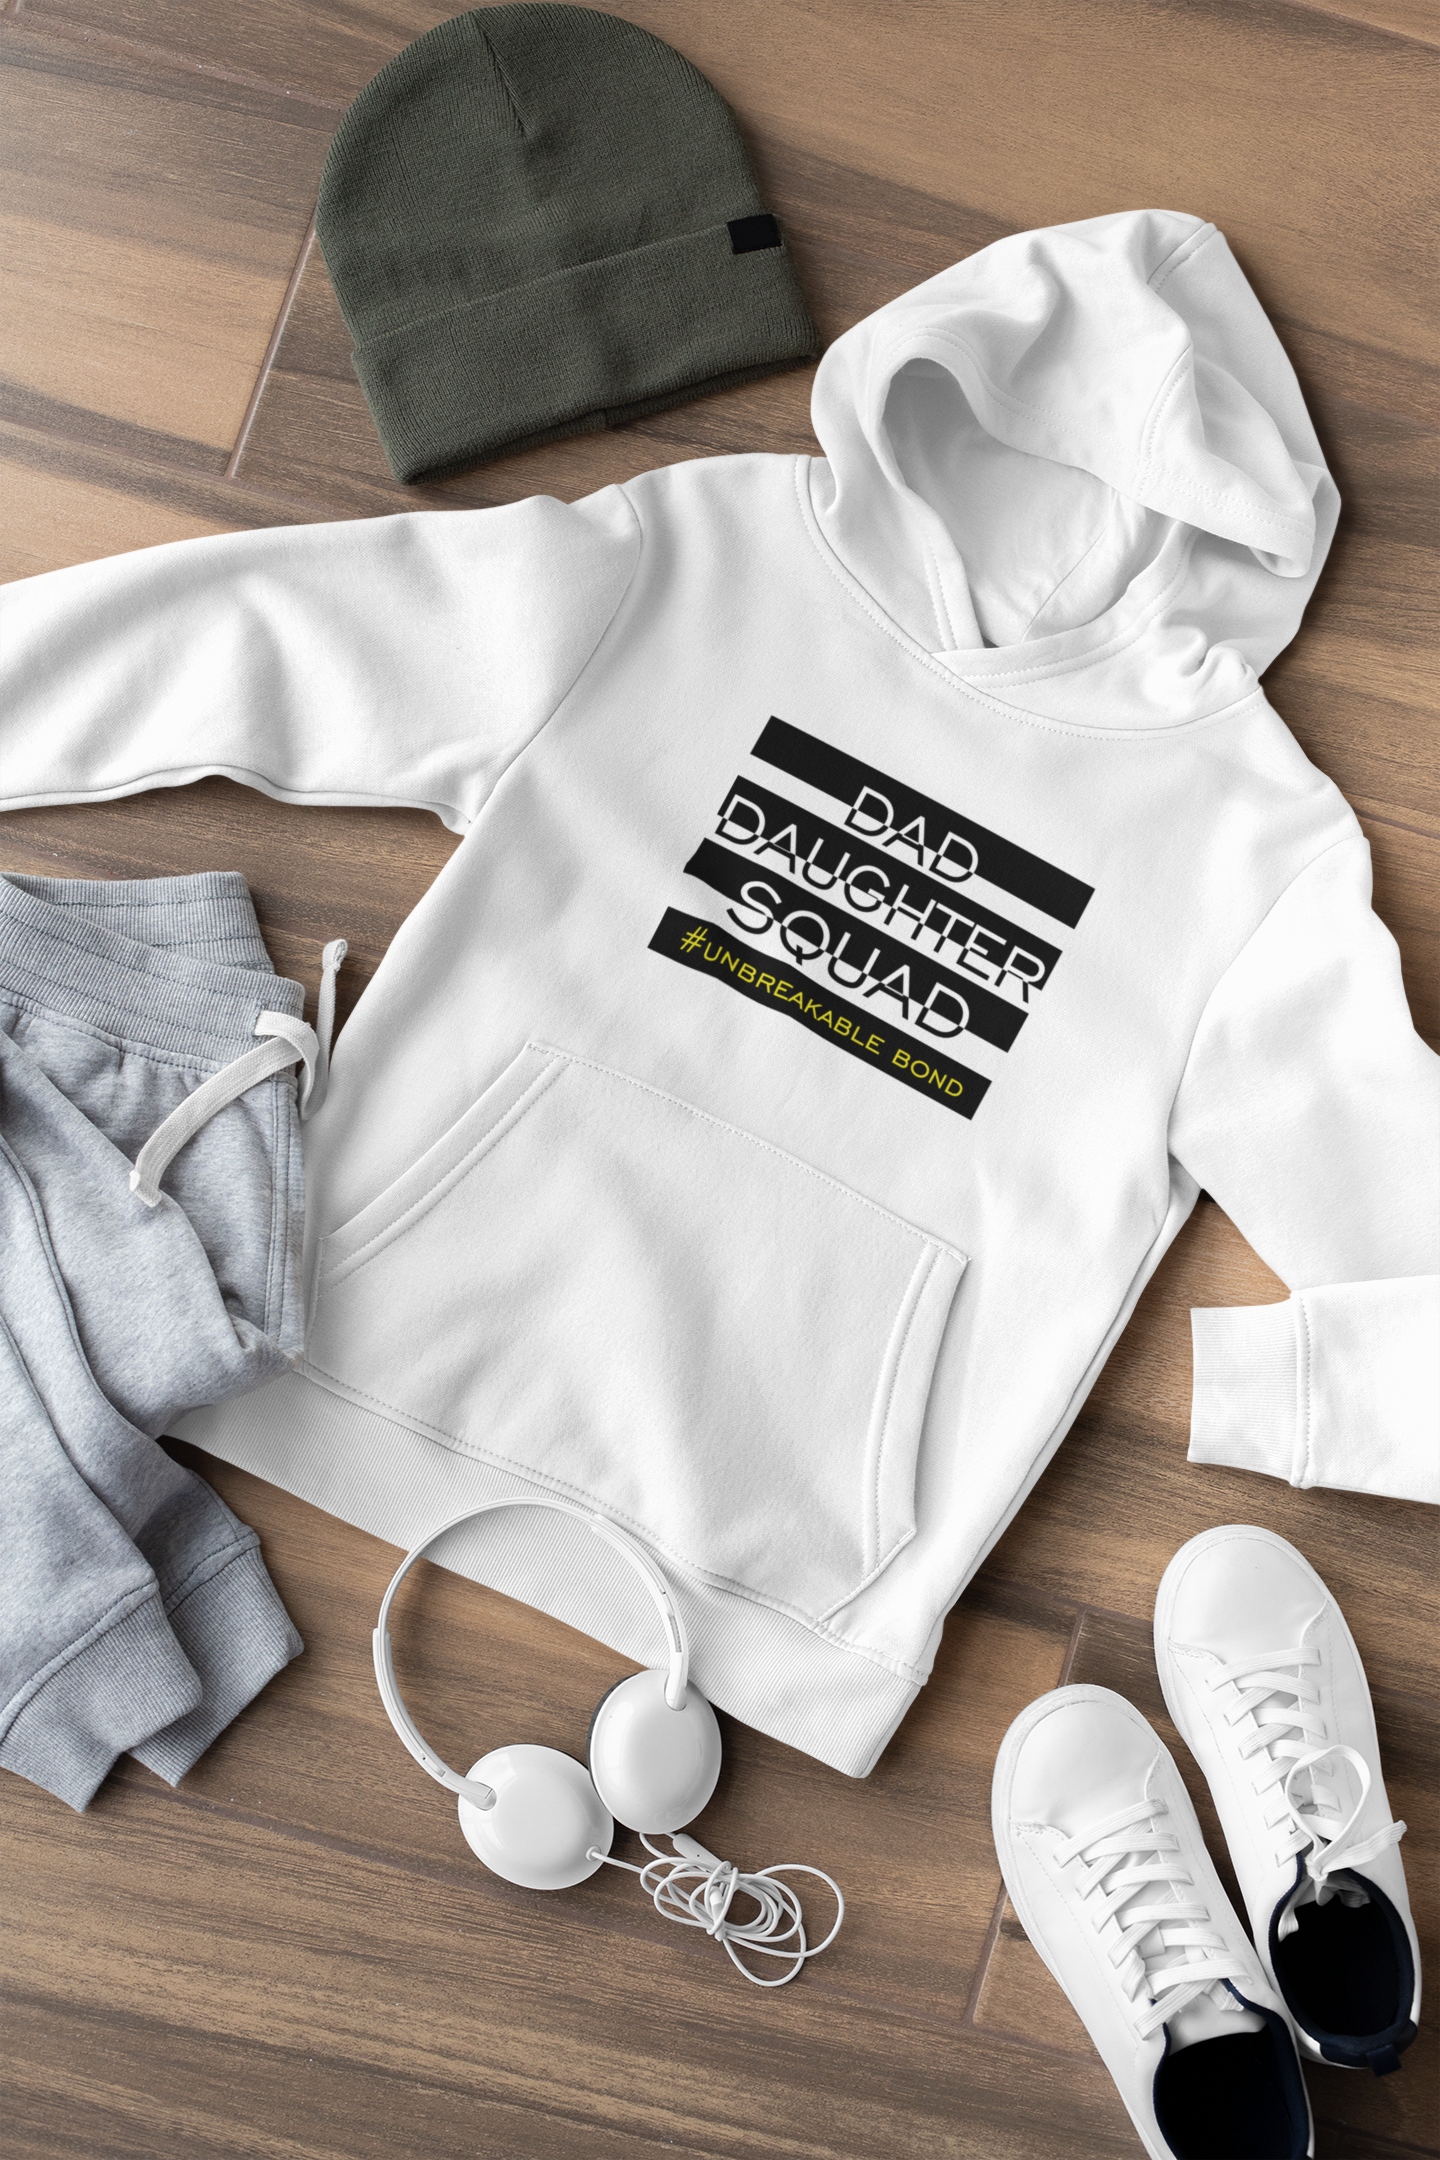 Dad Daughter Squad Father and Daughter White Matching Hoodies- FunkyTradition